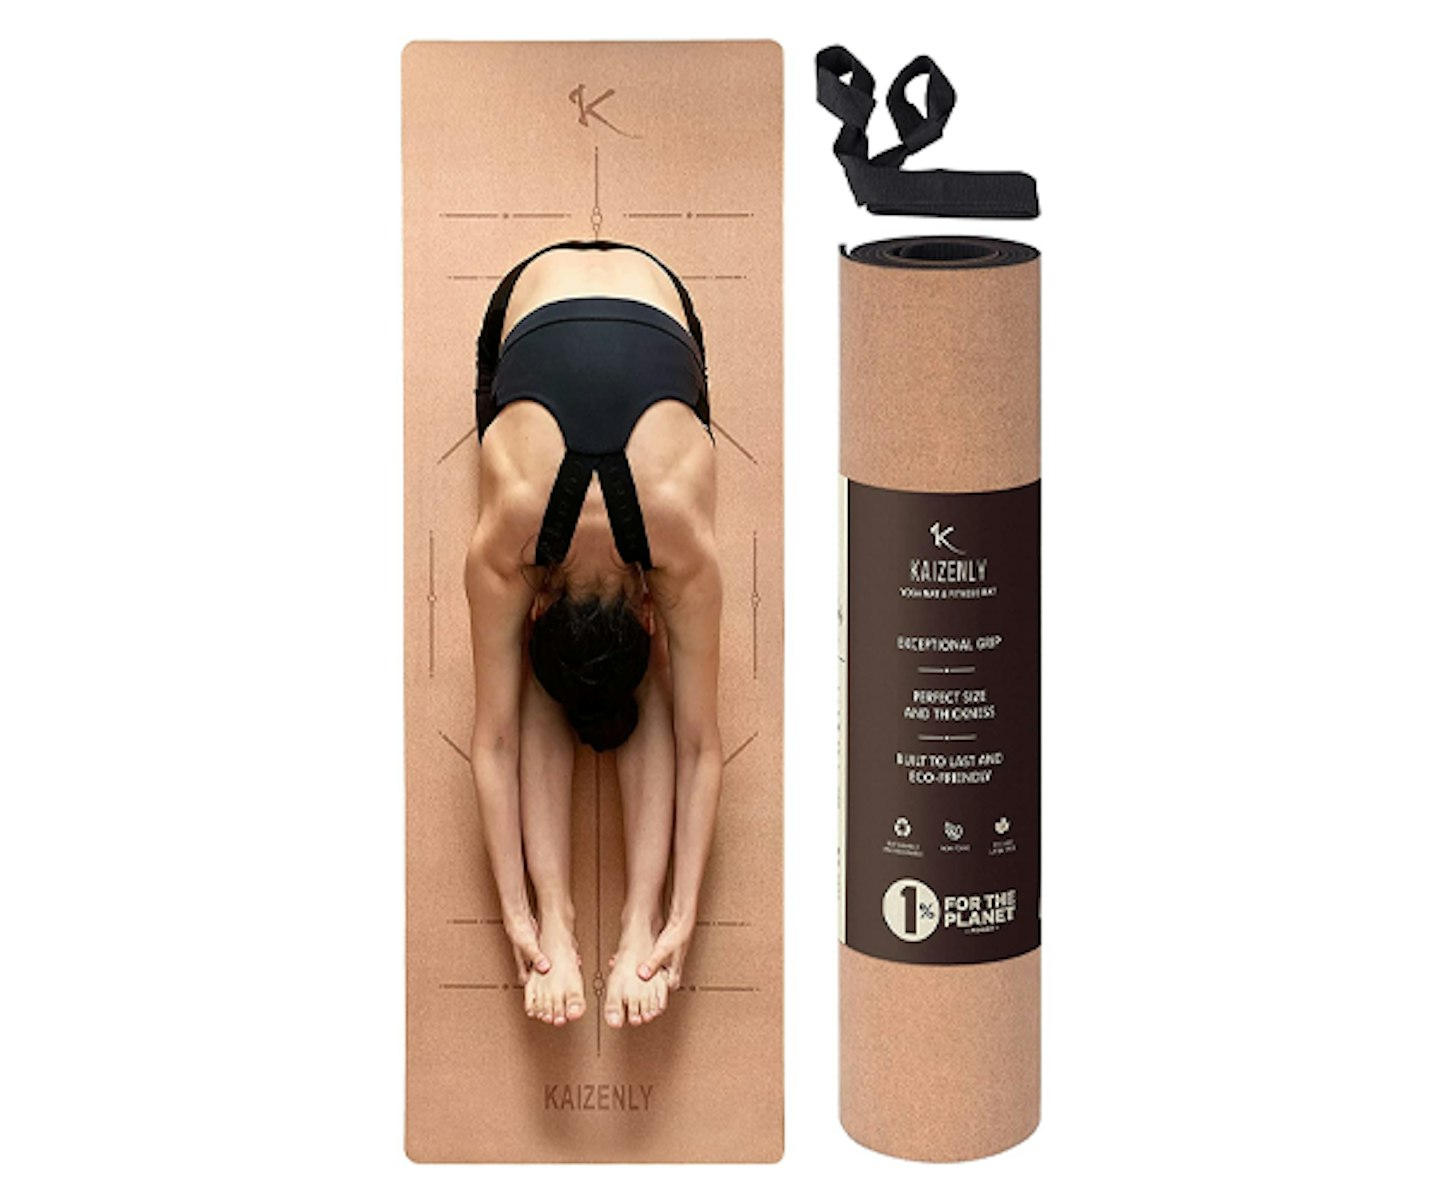 Complete Eco-Friendly Yoga Kit - Cork Mat, Recycled Bag, Cork